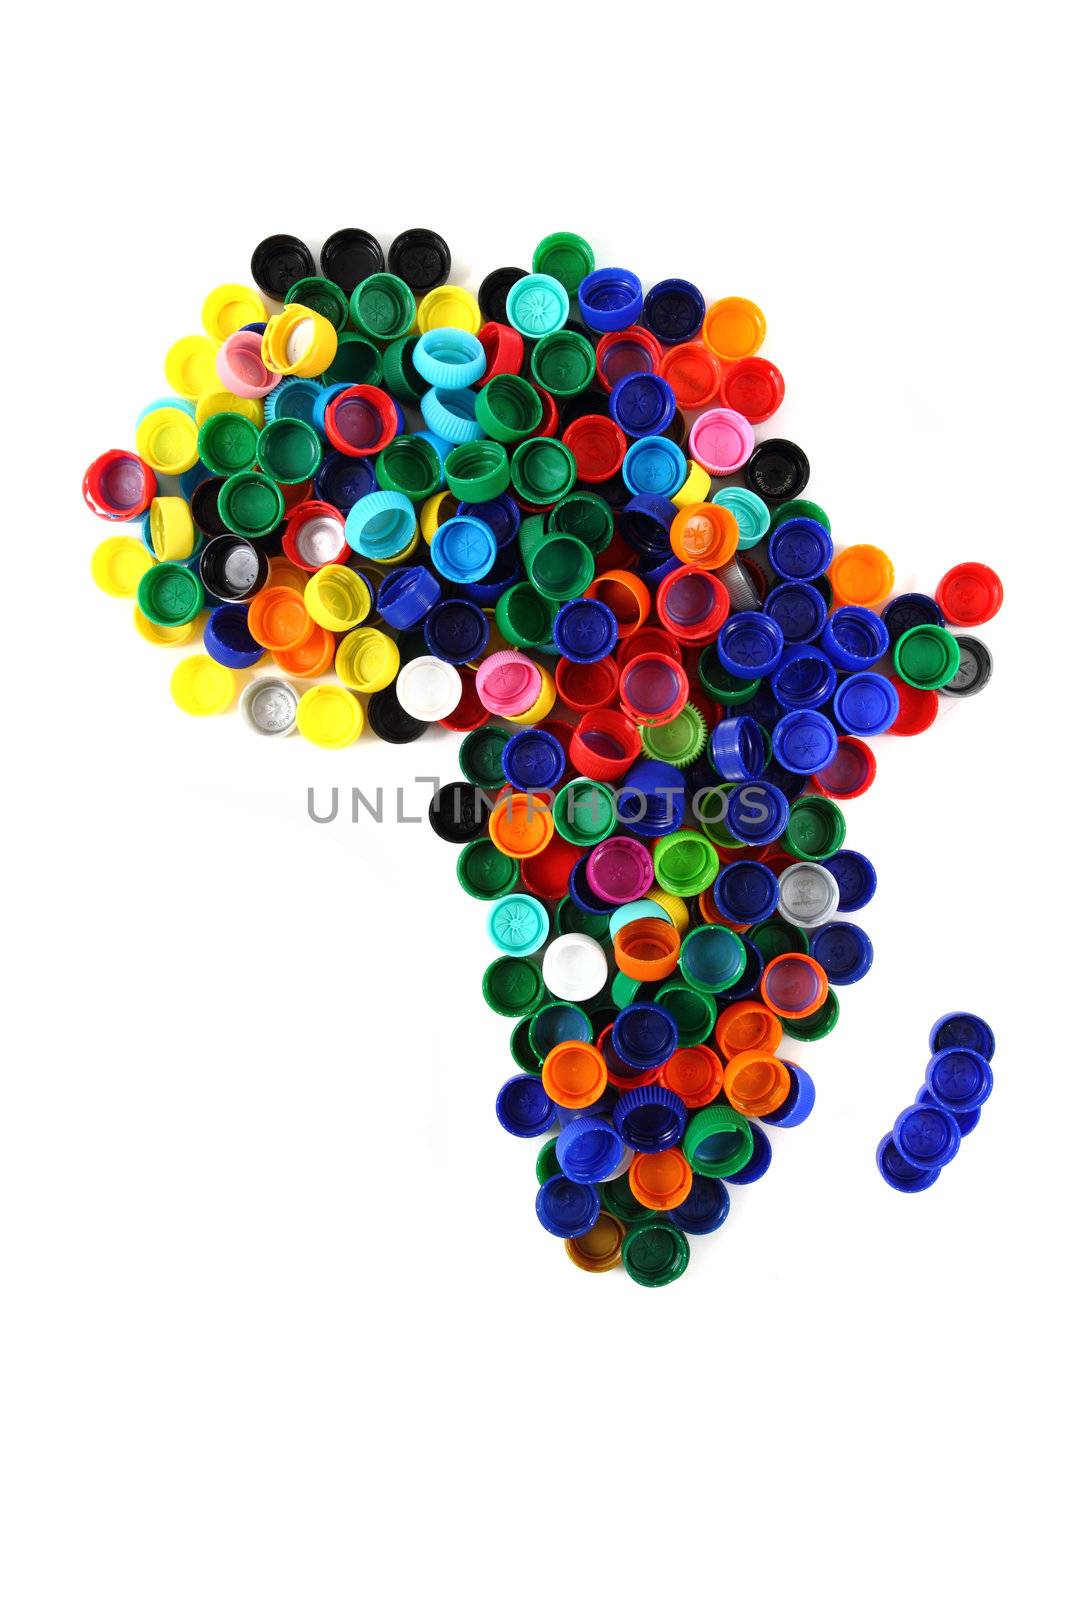 africa map from color plastic caps  by jonnysek